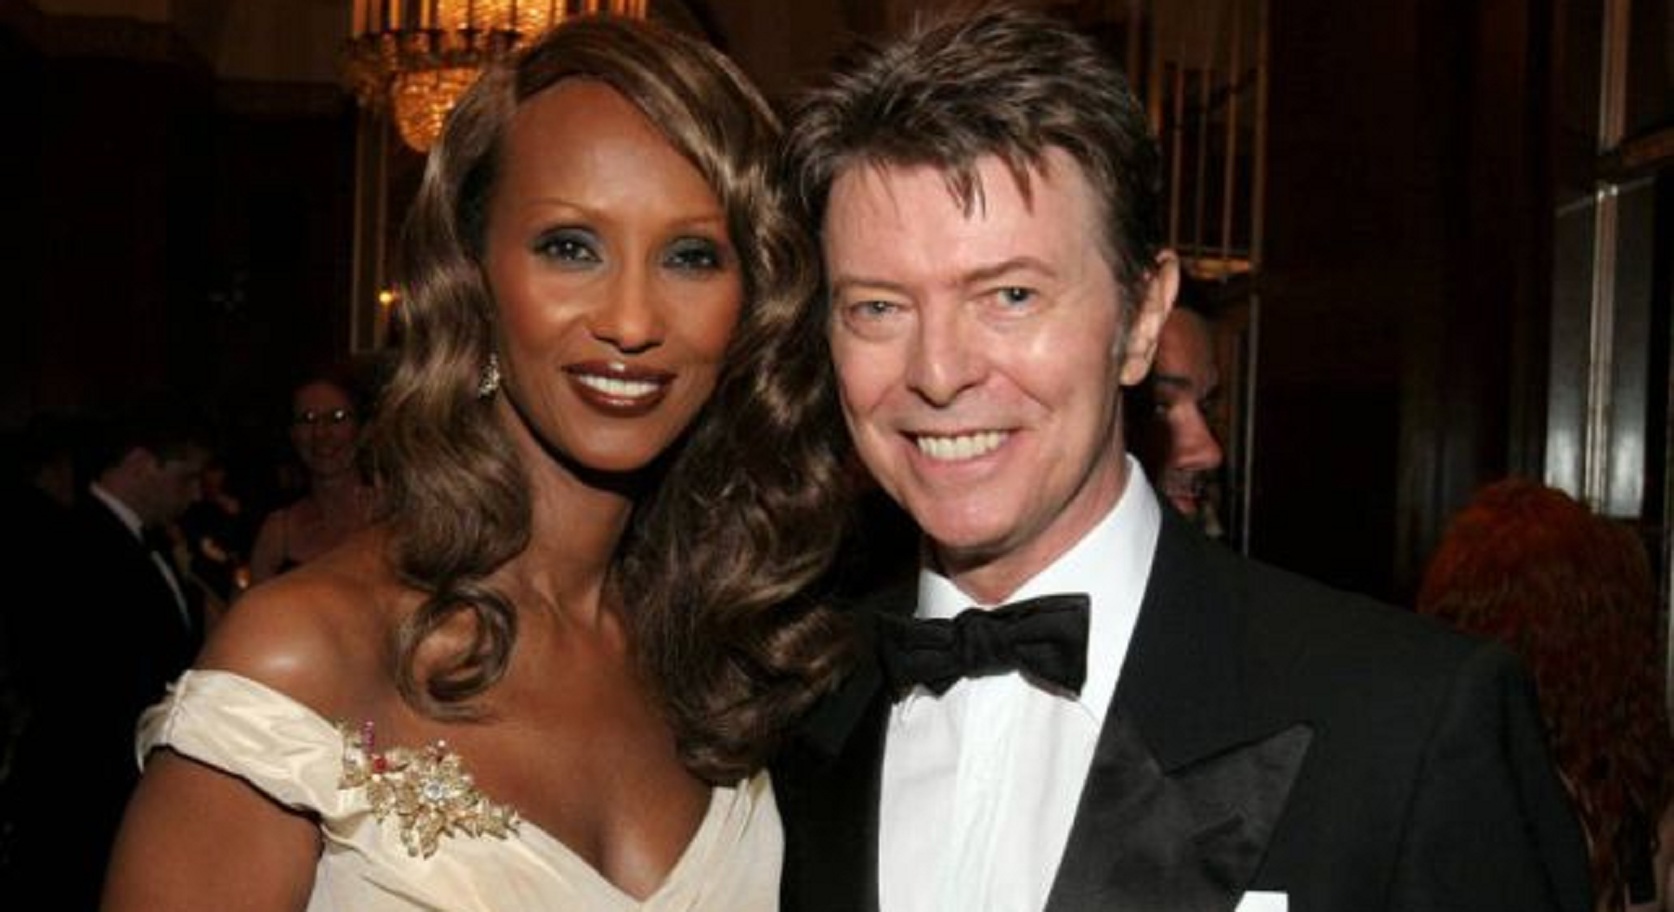 Iman Says She Will Never Remarry, Even Though She’s ‘Lonely’ After Husband David Bowie’s Death